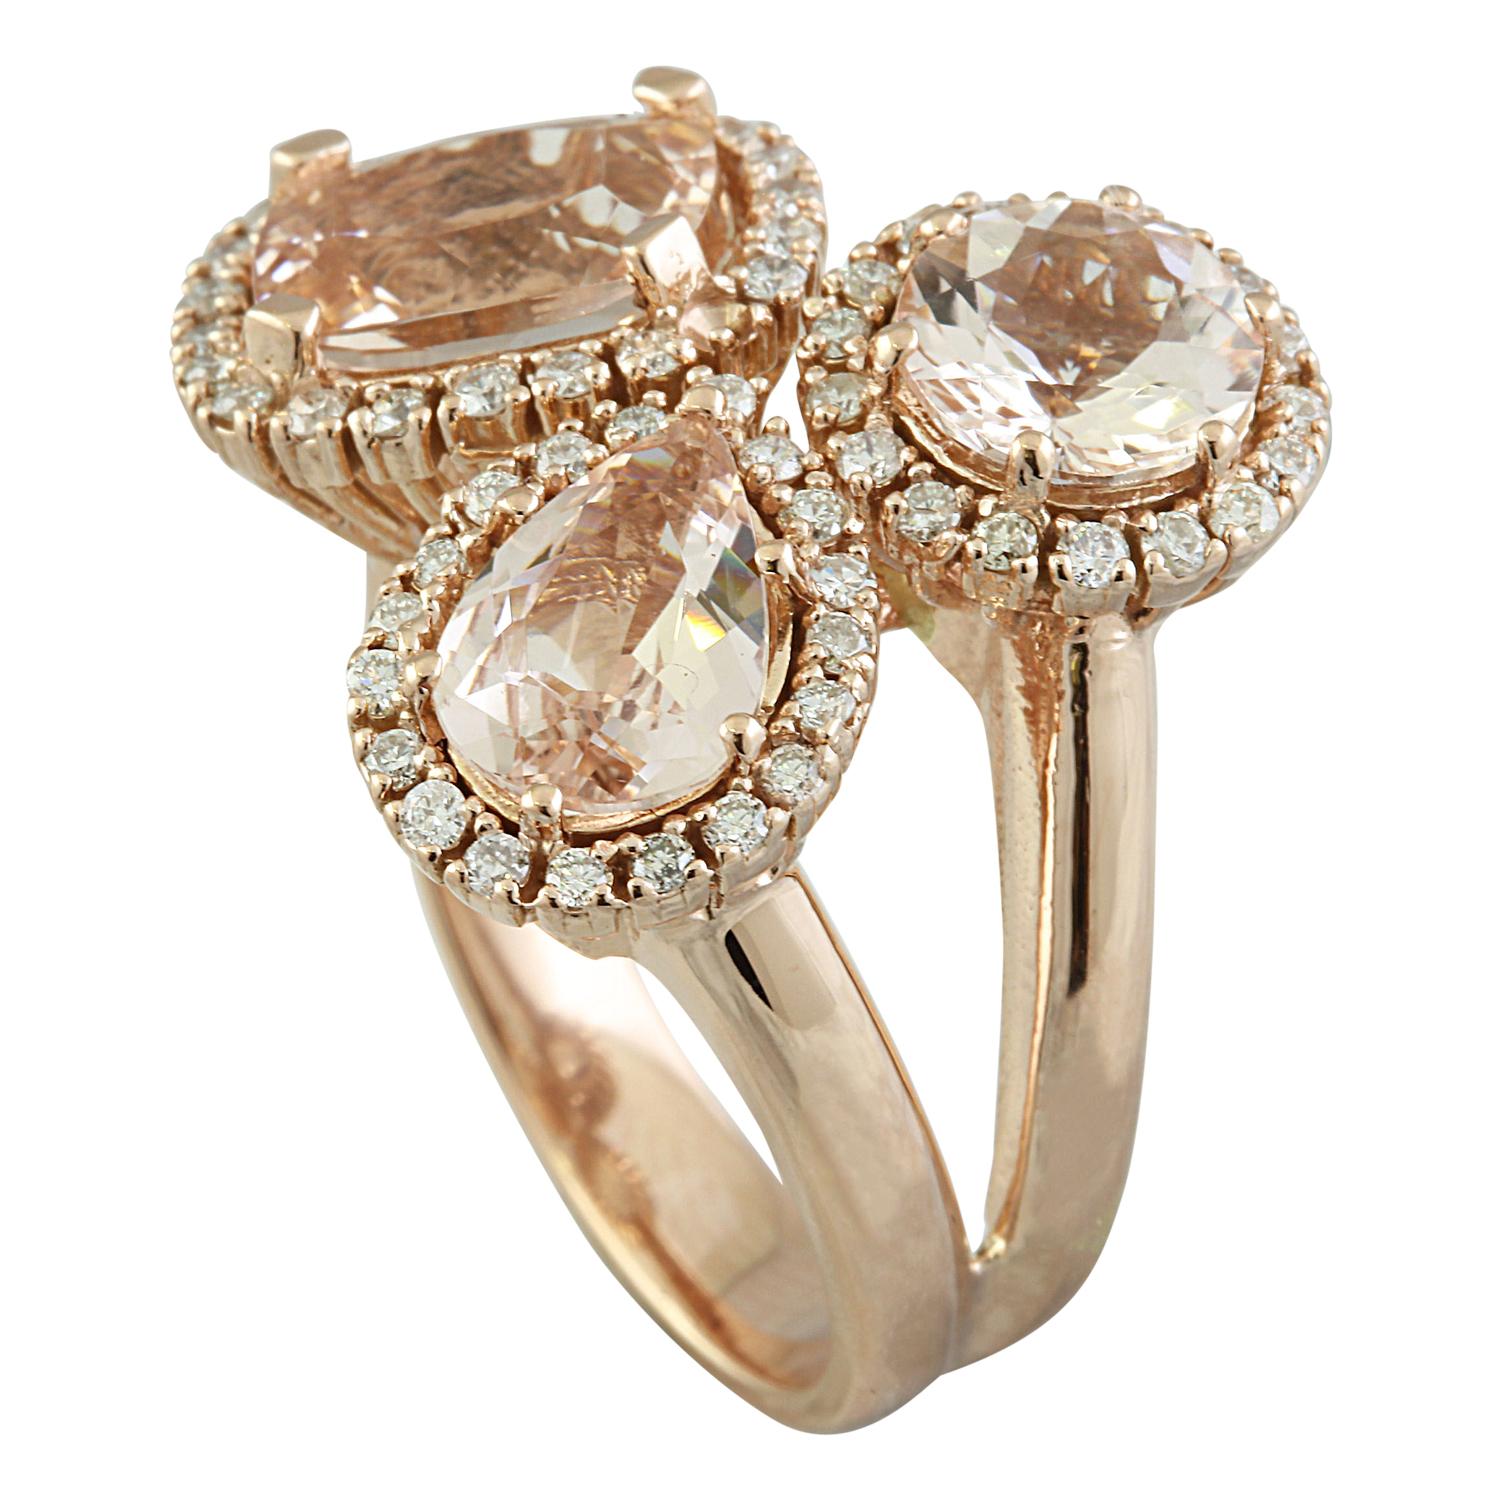 5.69 Carat Natural Morganite 14 Karat Solid Rose Gold Diamond Ring
Stamped: 14K
Ring Size: 7
Total Ring Weight: 8.8 Grams 
Morganite Weight: 4.89 Carat  
Quantity: 3
Shape: Cushion, Round, Pear
Diamond Weight: 0.80 Carat (F-G Color, VS2-SI1 Clarity)